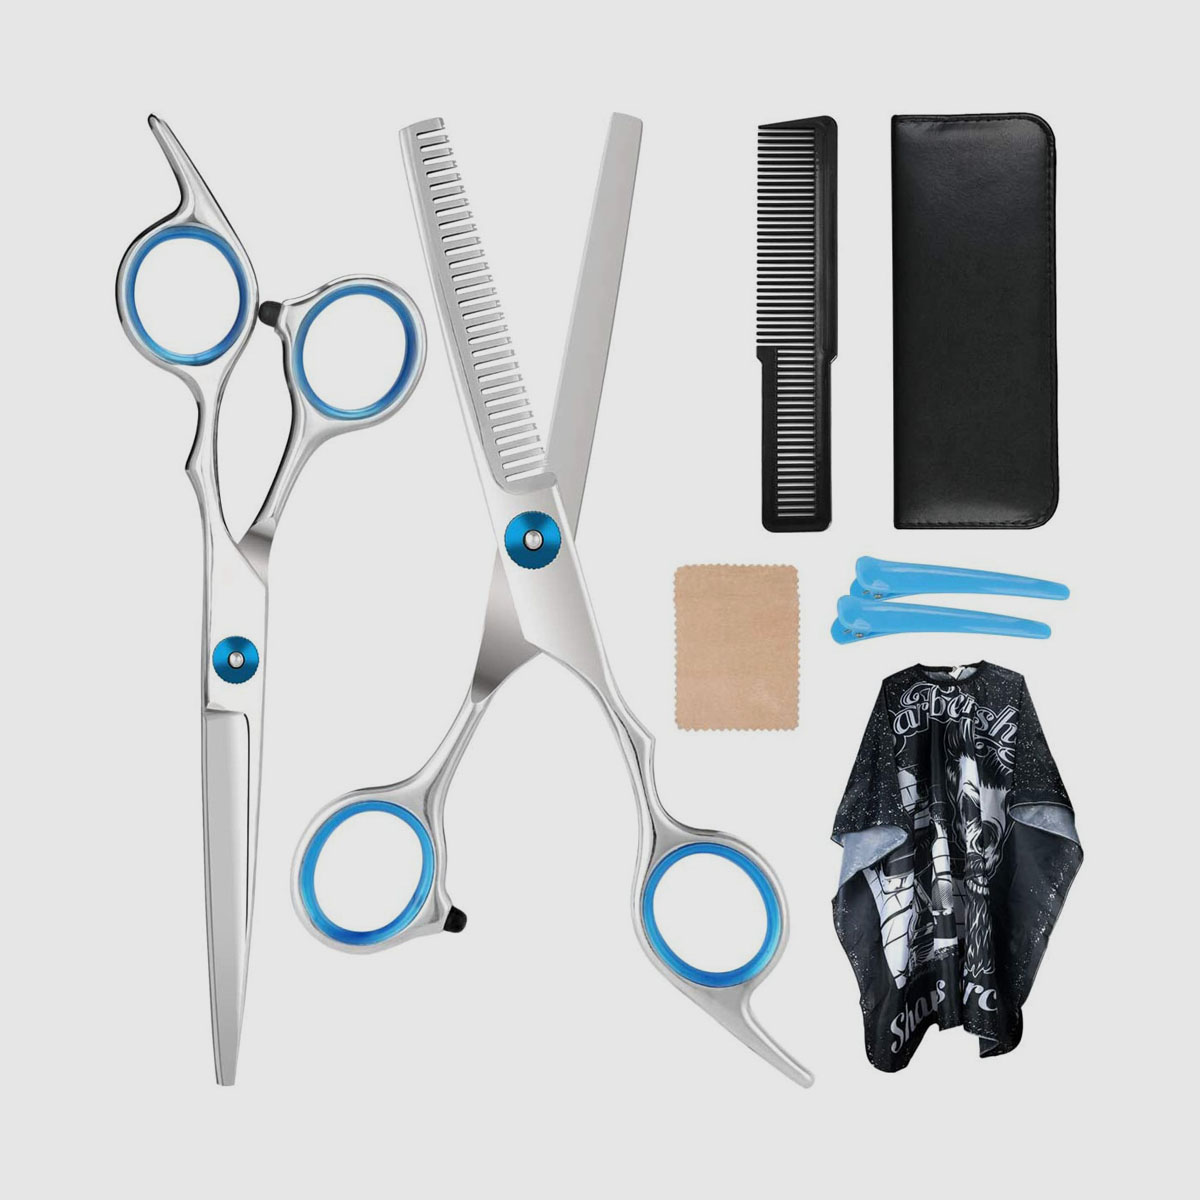 Different types of hair cutting shears